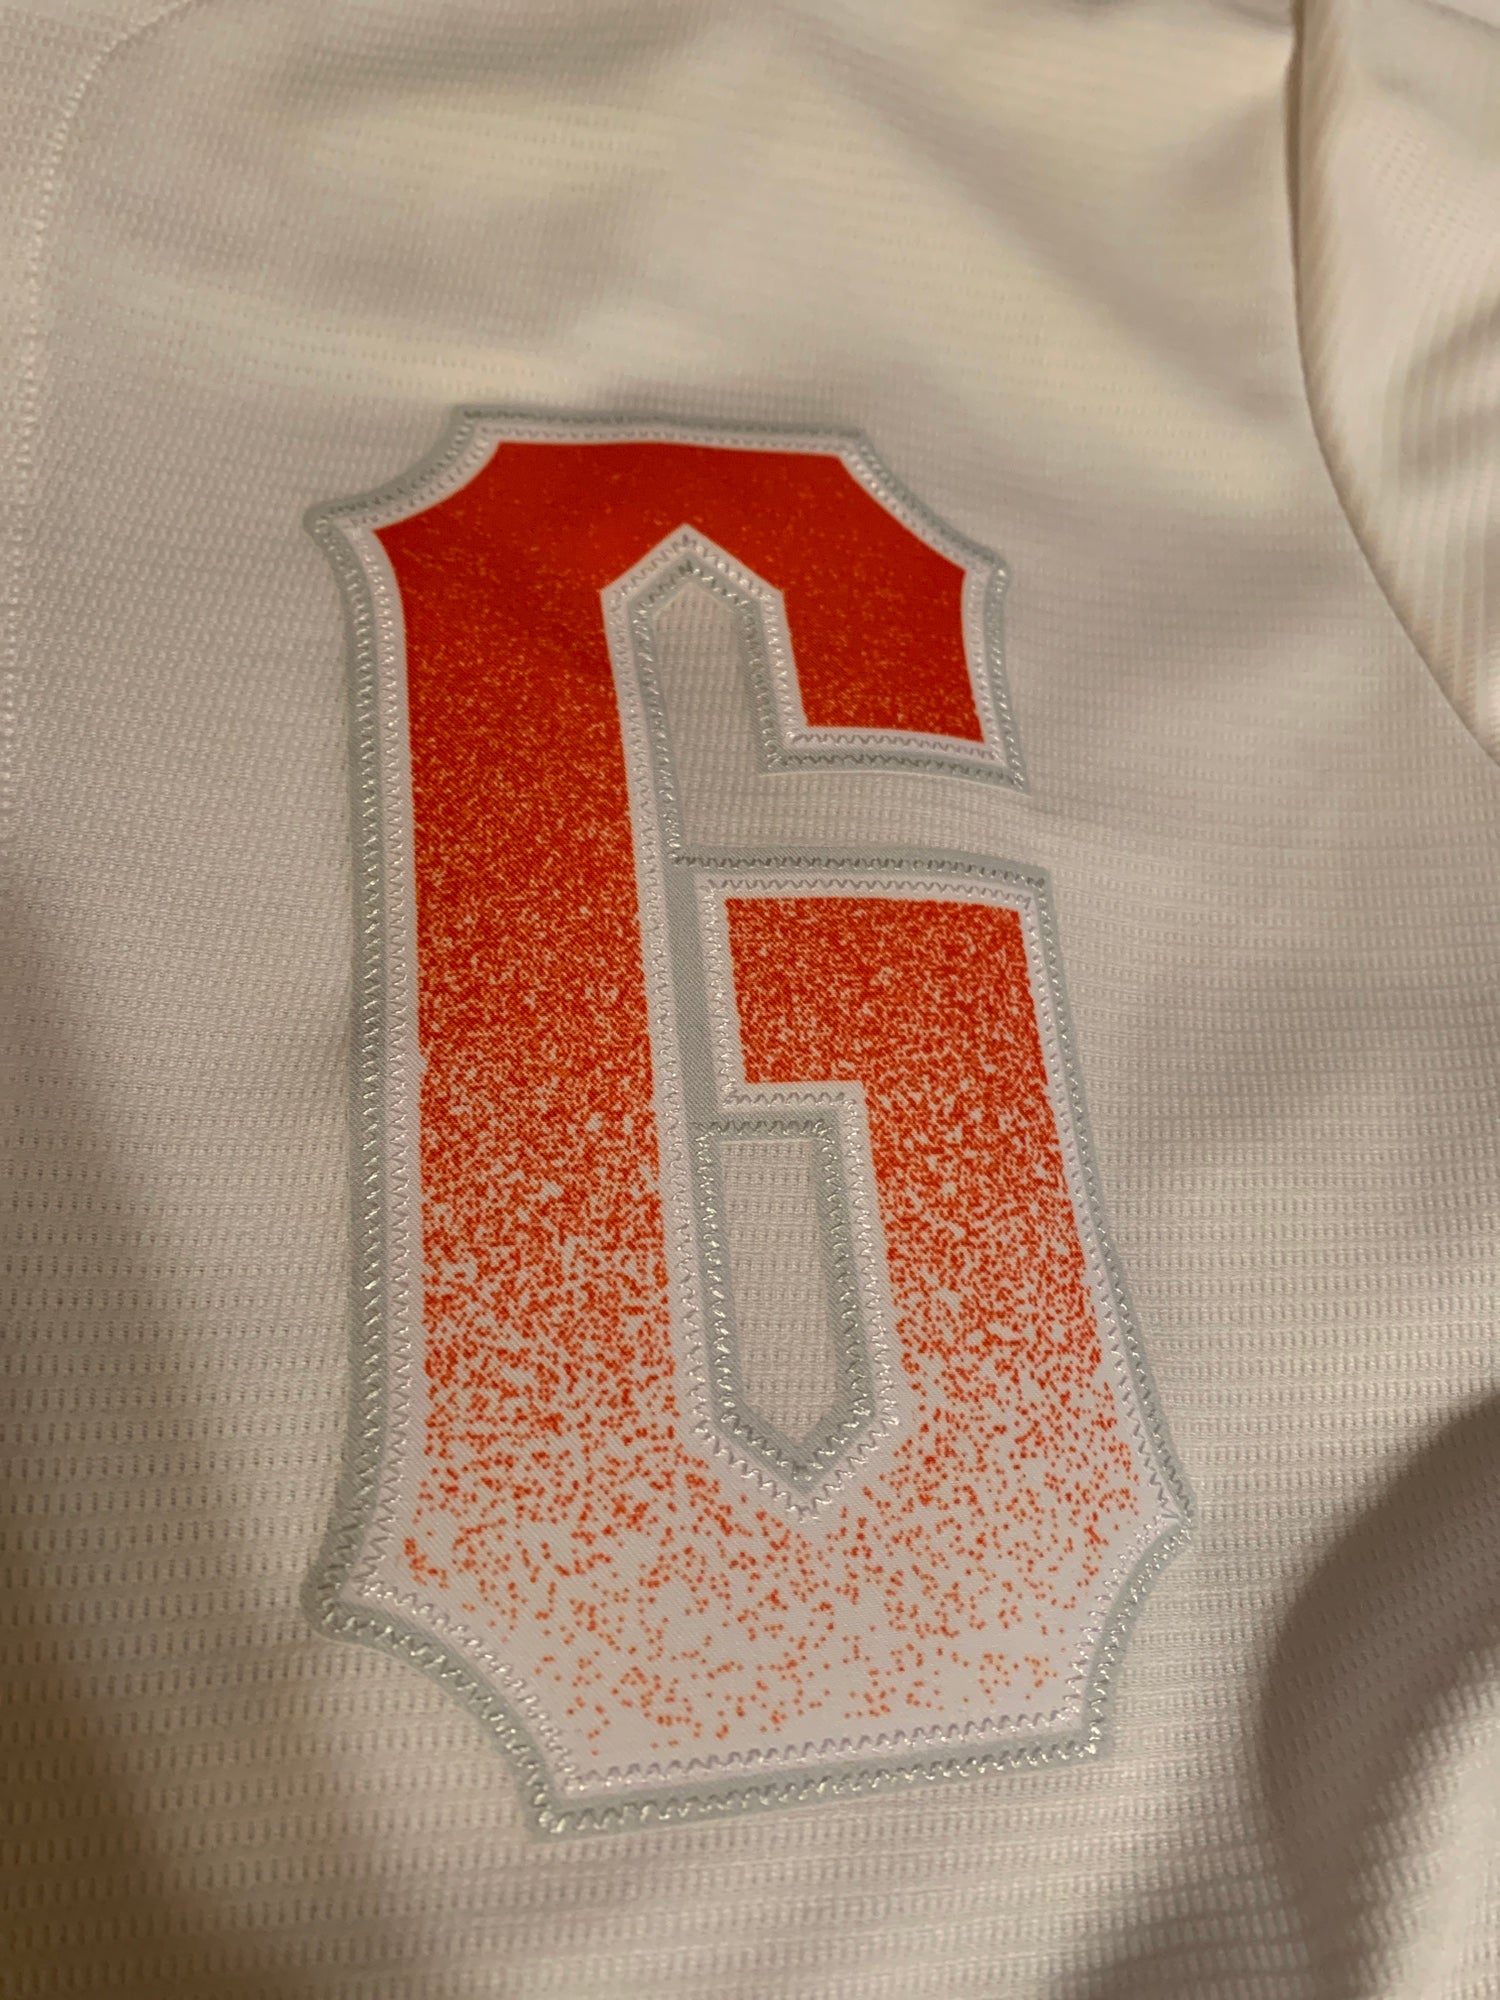 giants connect jersey